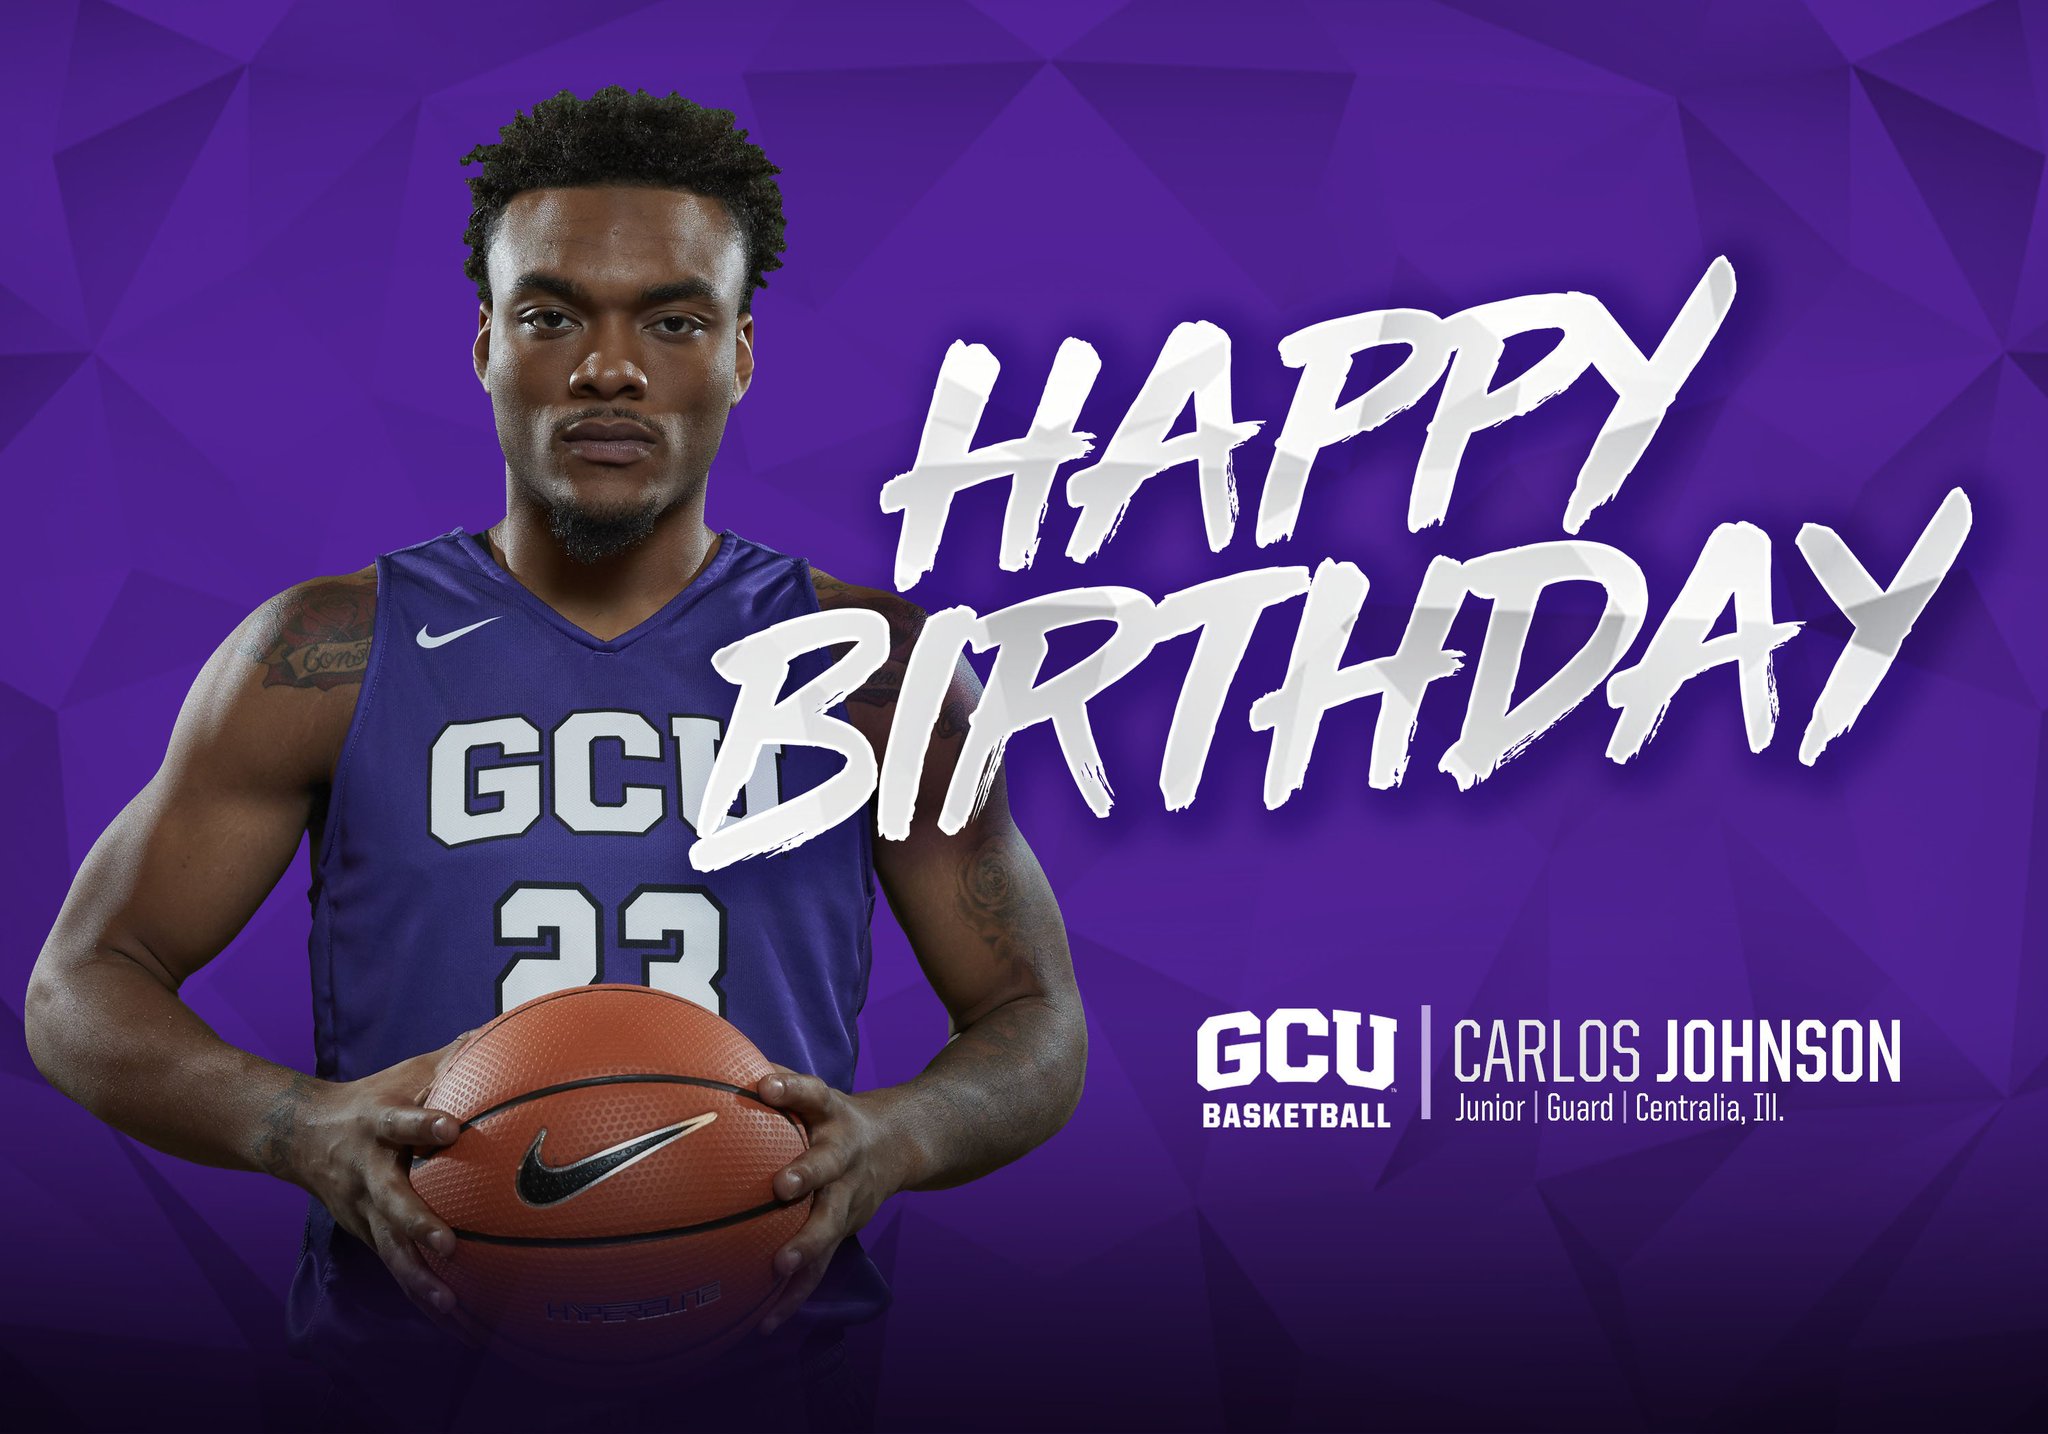 Happy birthday to the one and only Carlos Johnson! 